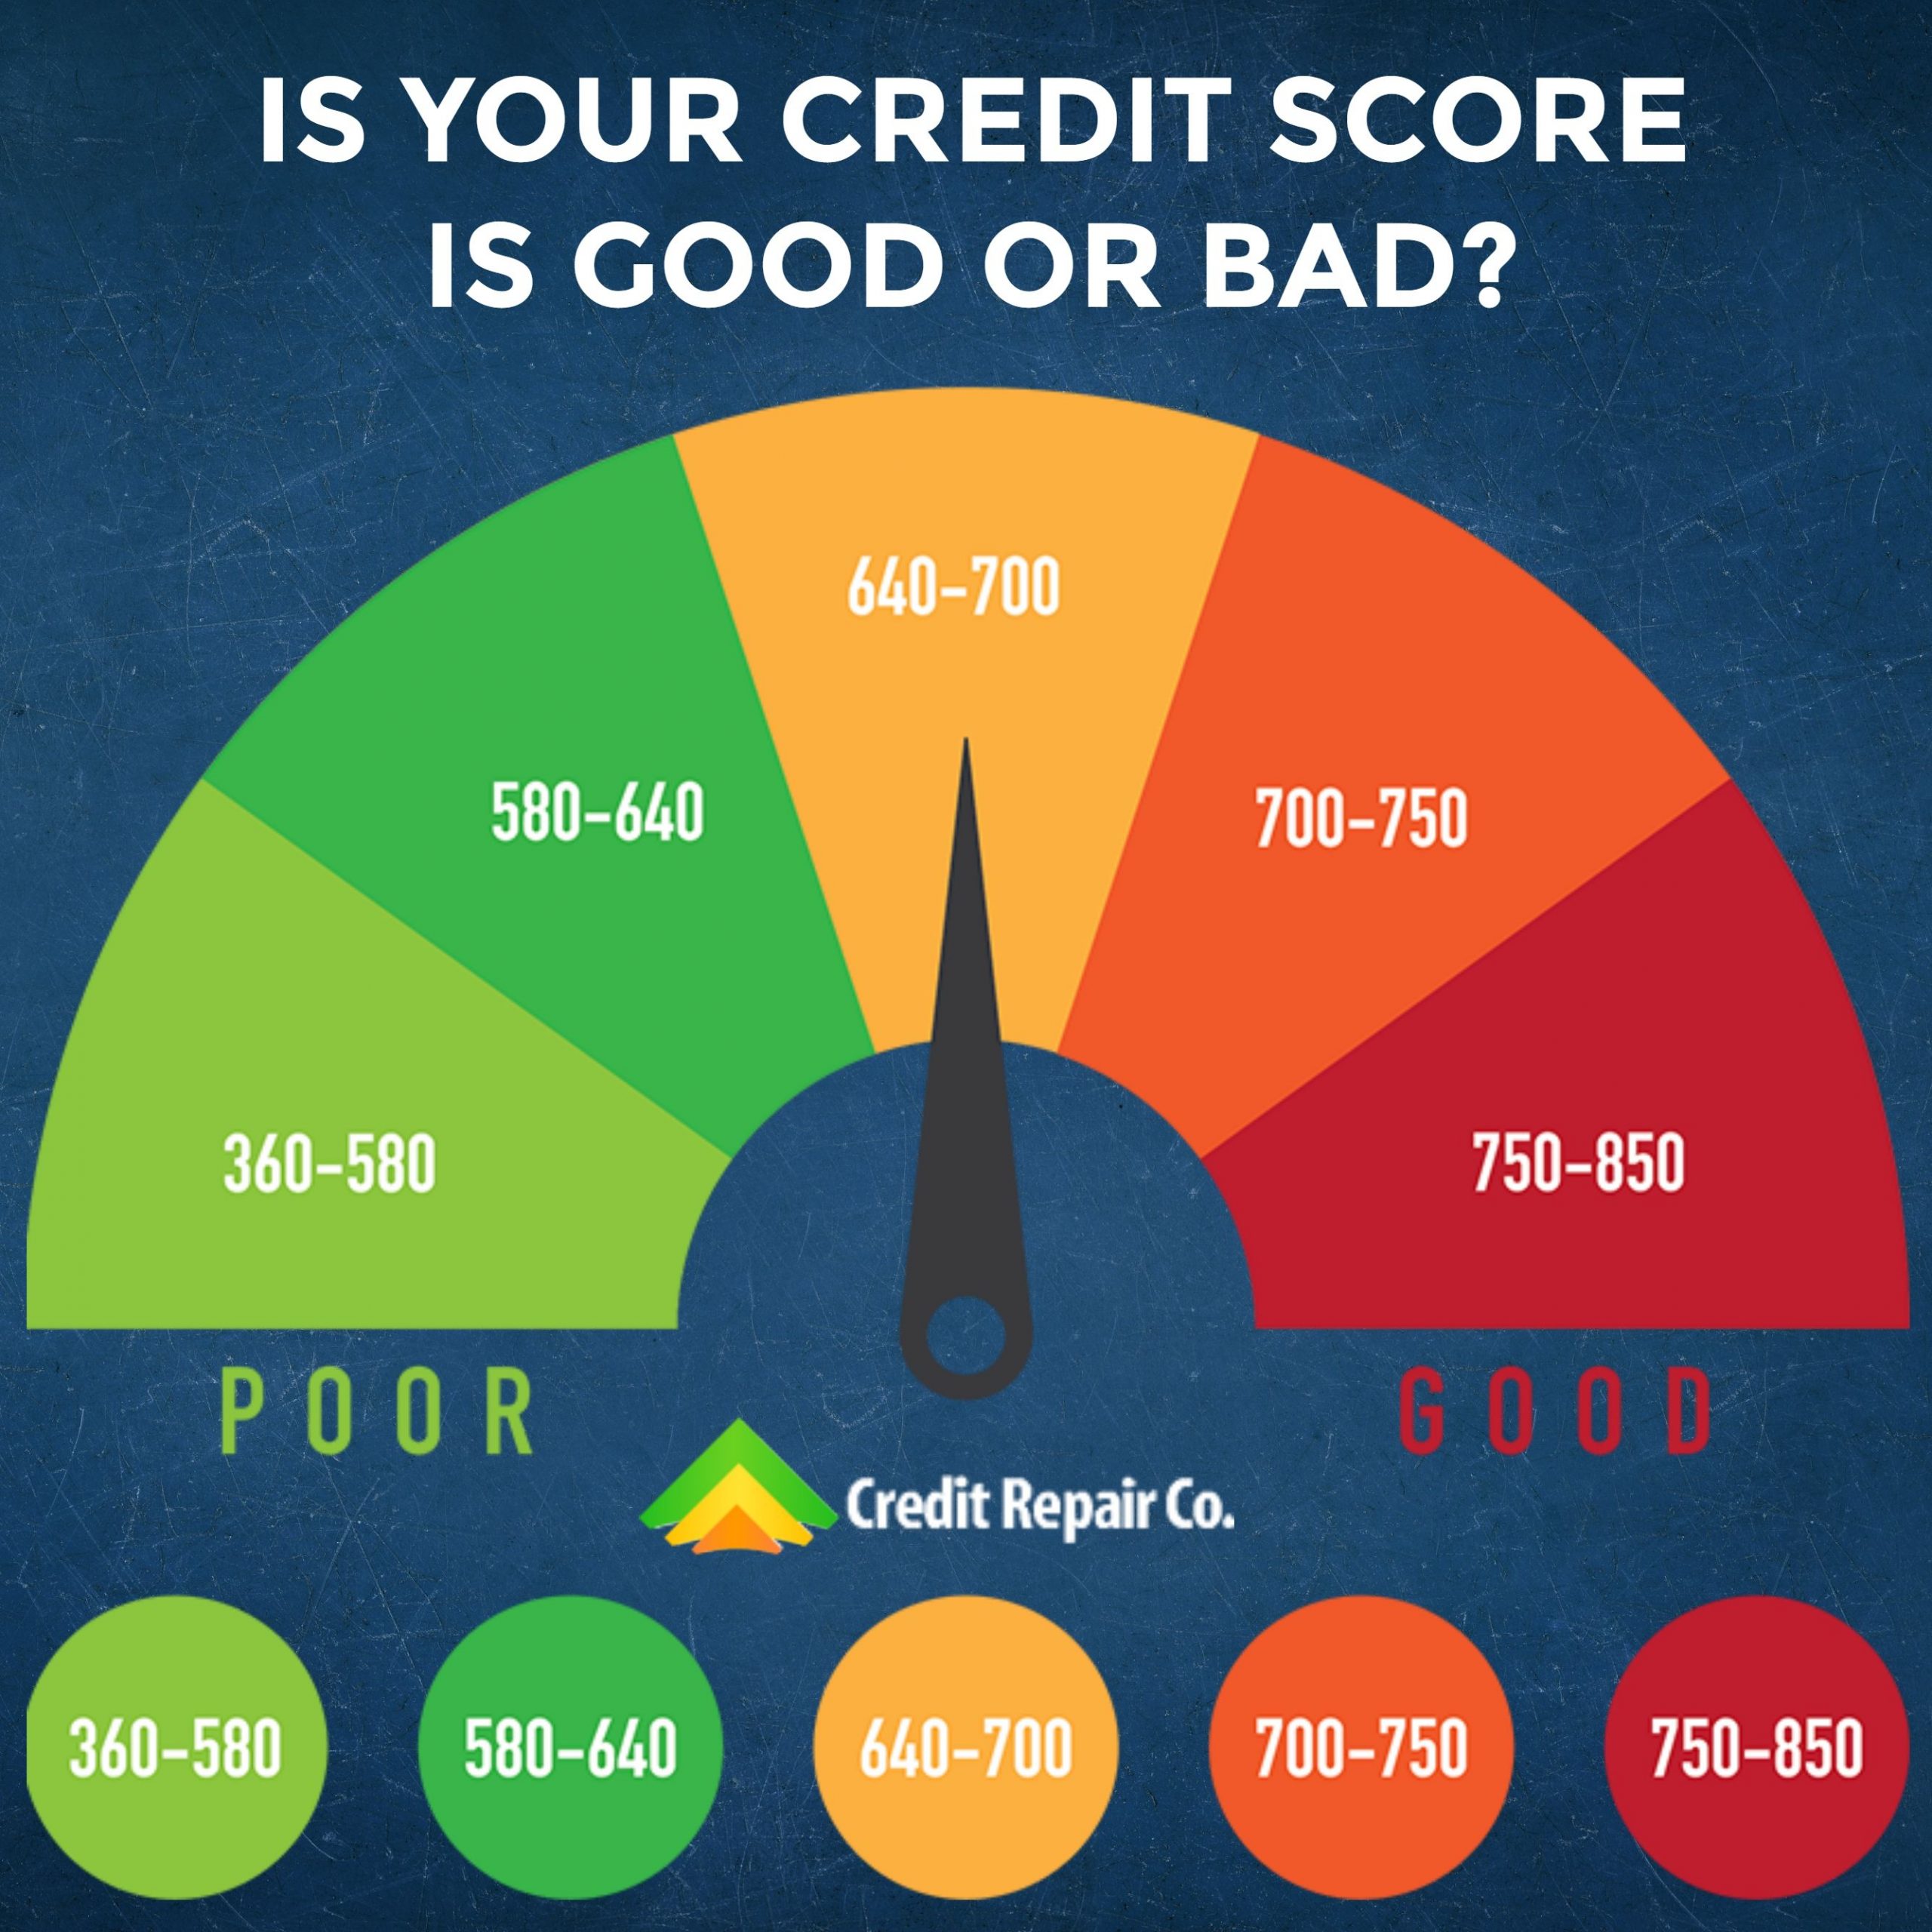 Car Loan Interest Rate With 600 Credit Score